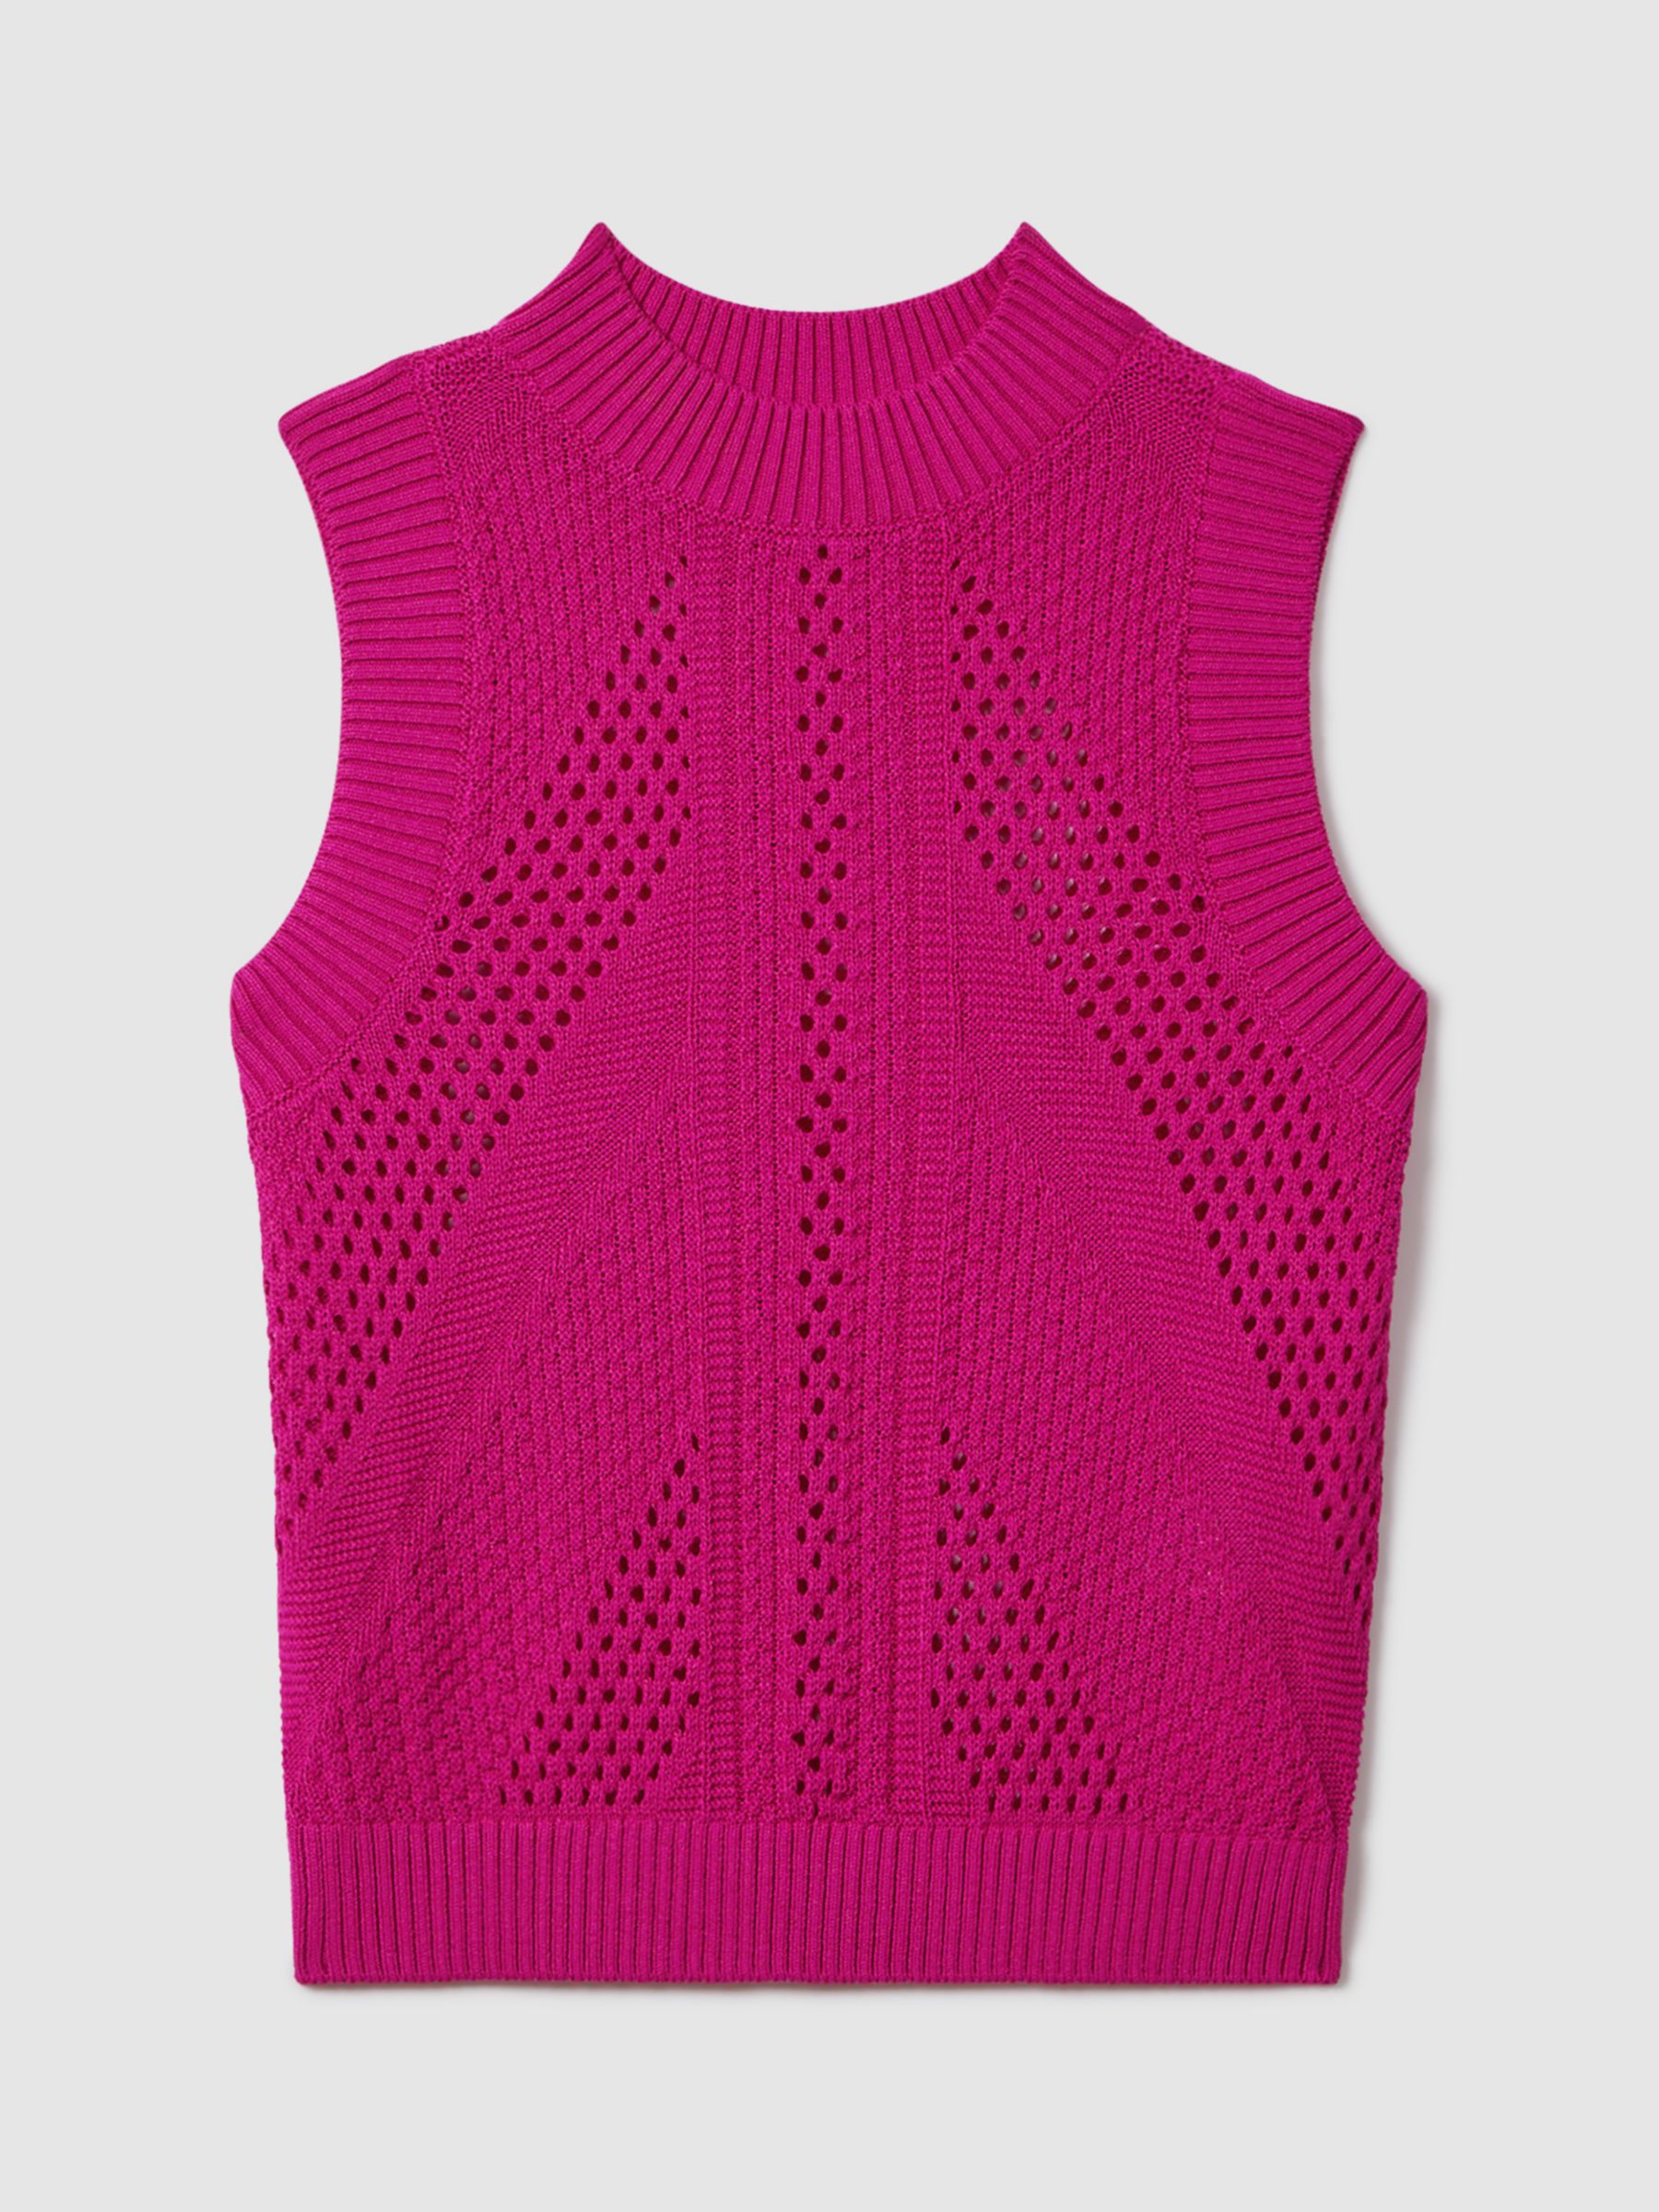 FLORERE Crochet Trim Knitted Tank Top, Bright Pink, 8